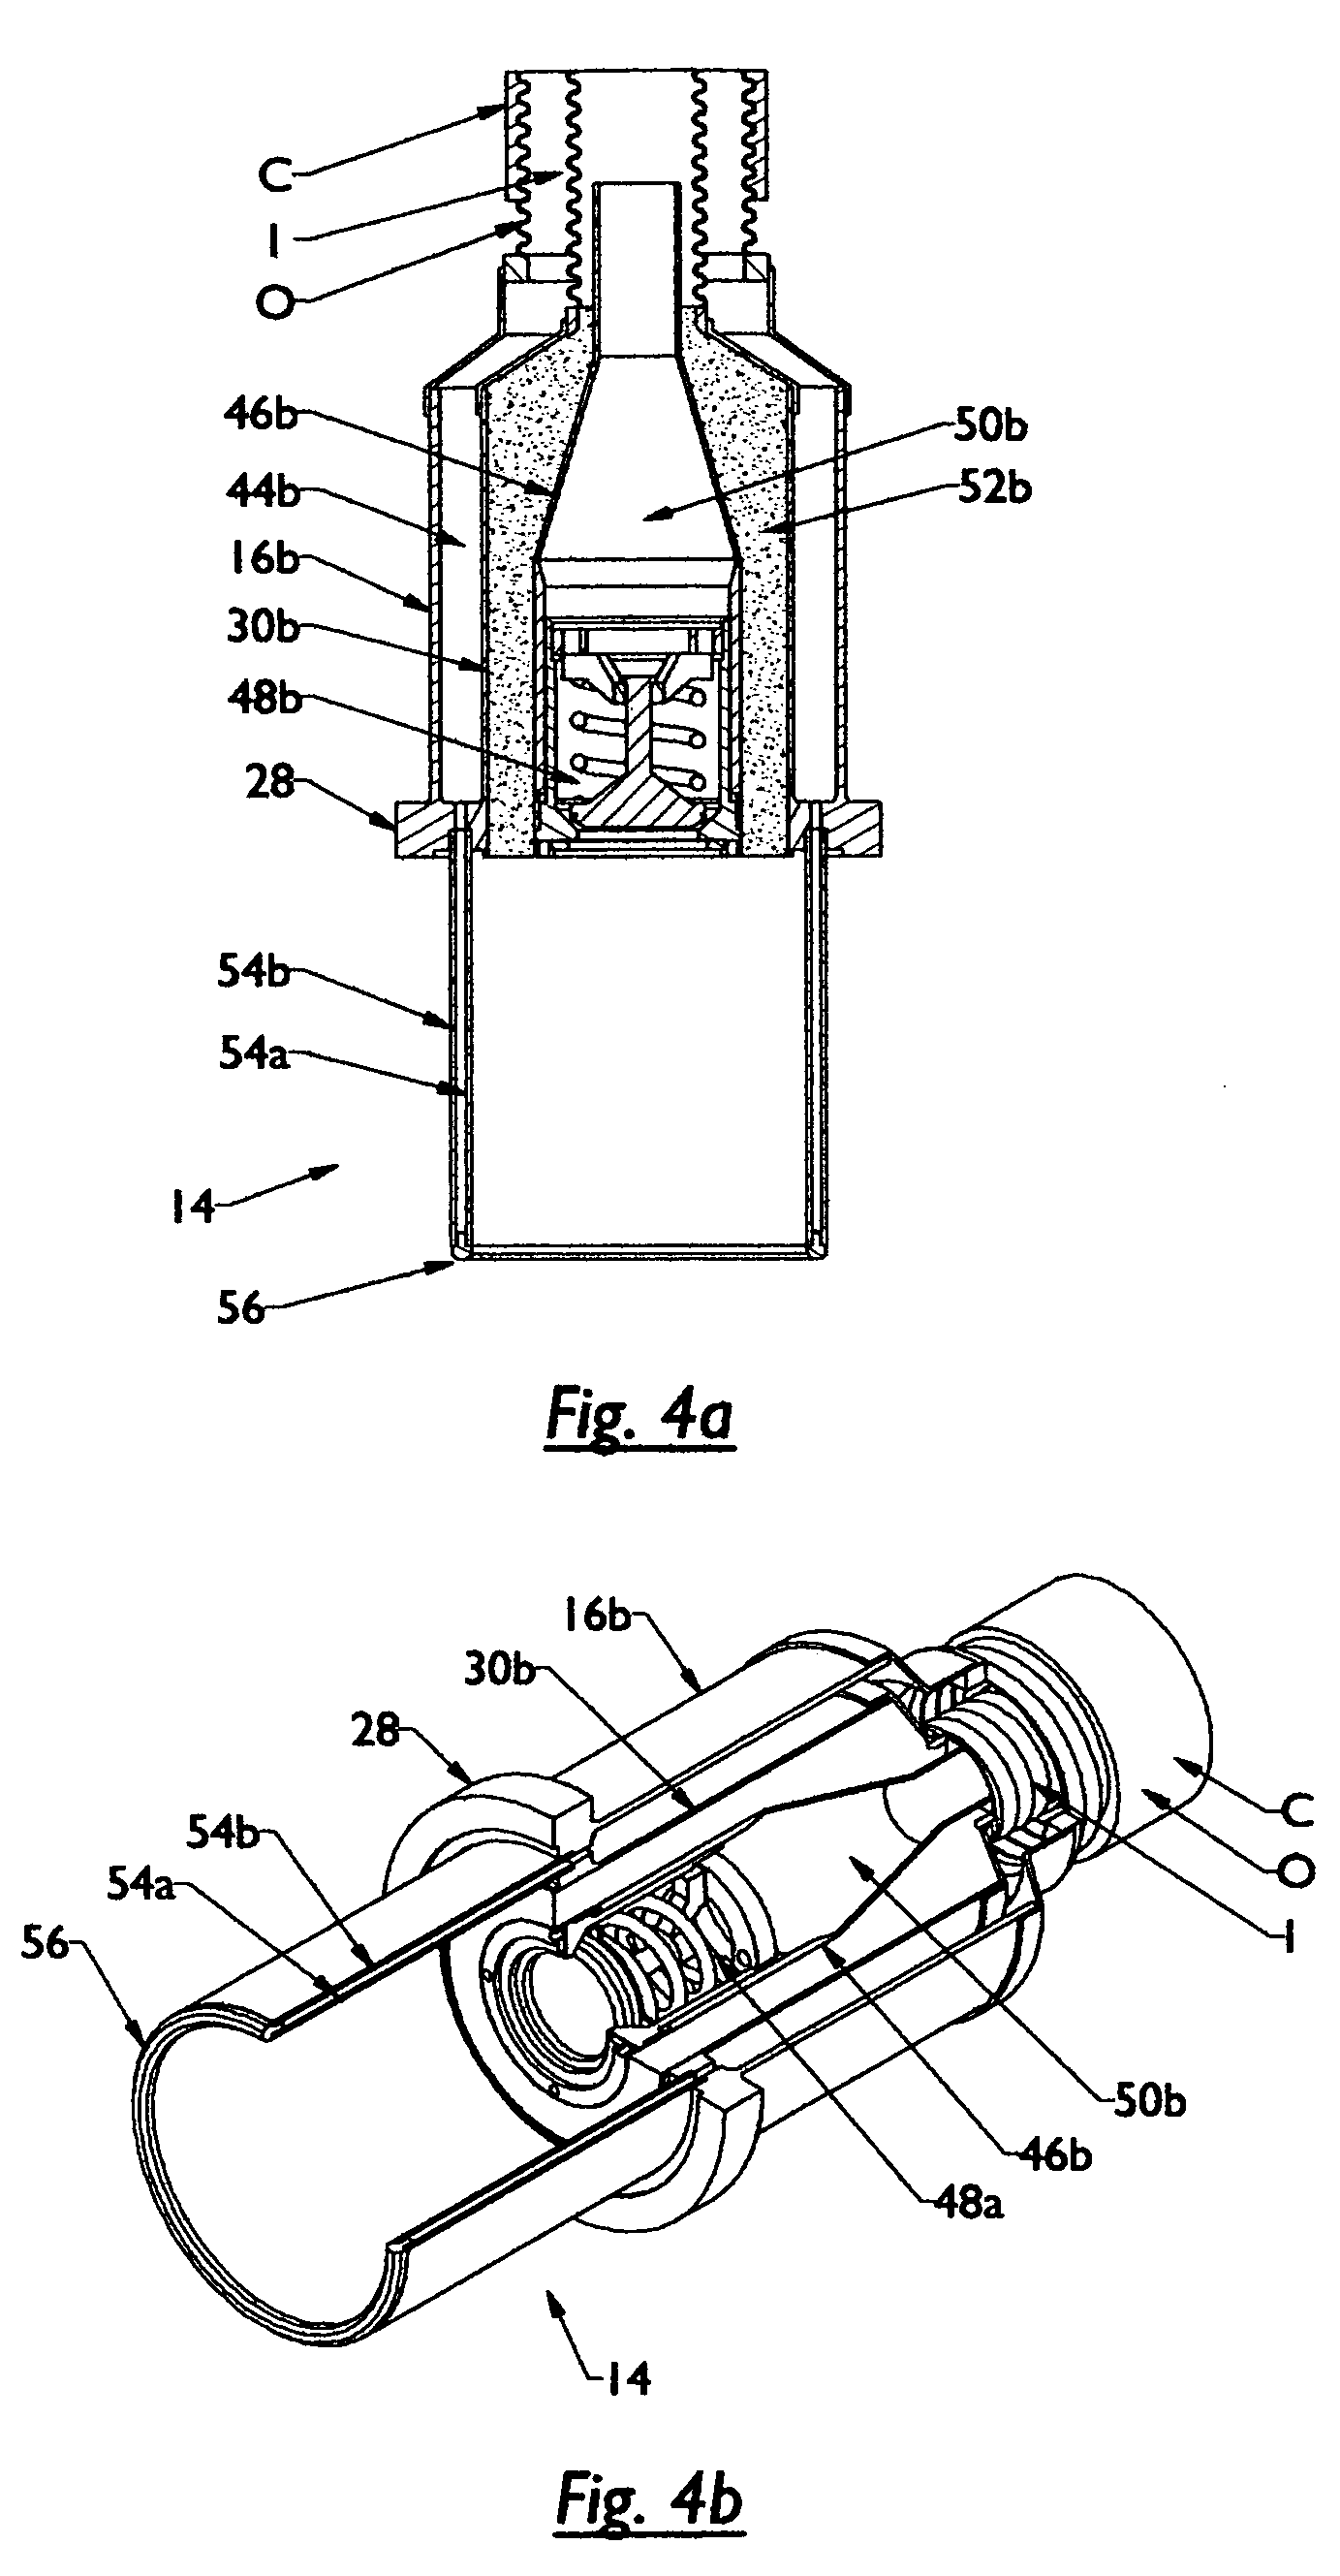 System for quick disconnect termination or connection for cryogenic transfer lines with simultaneous electrical connection